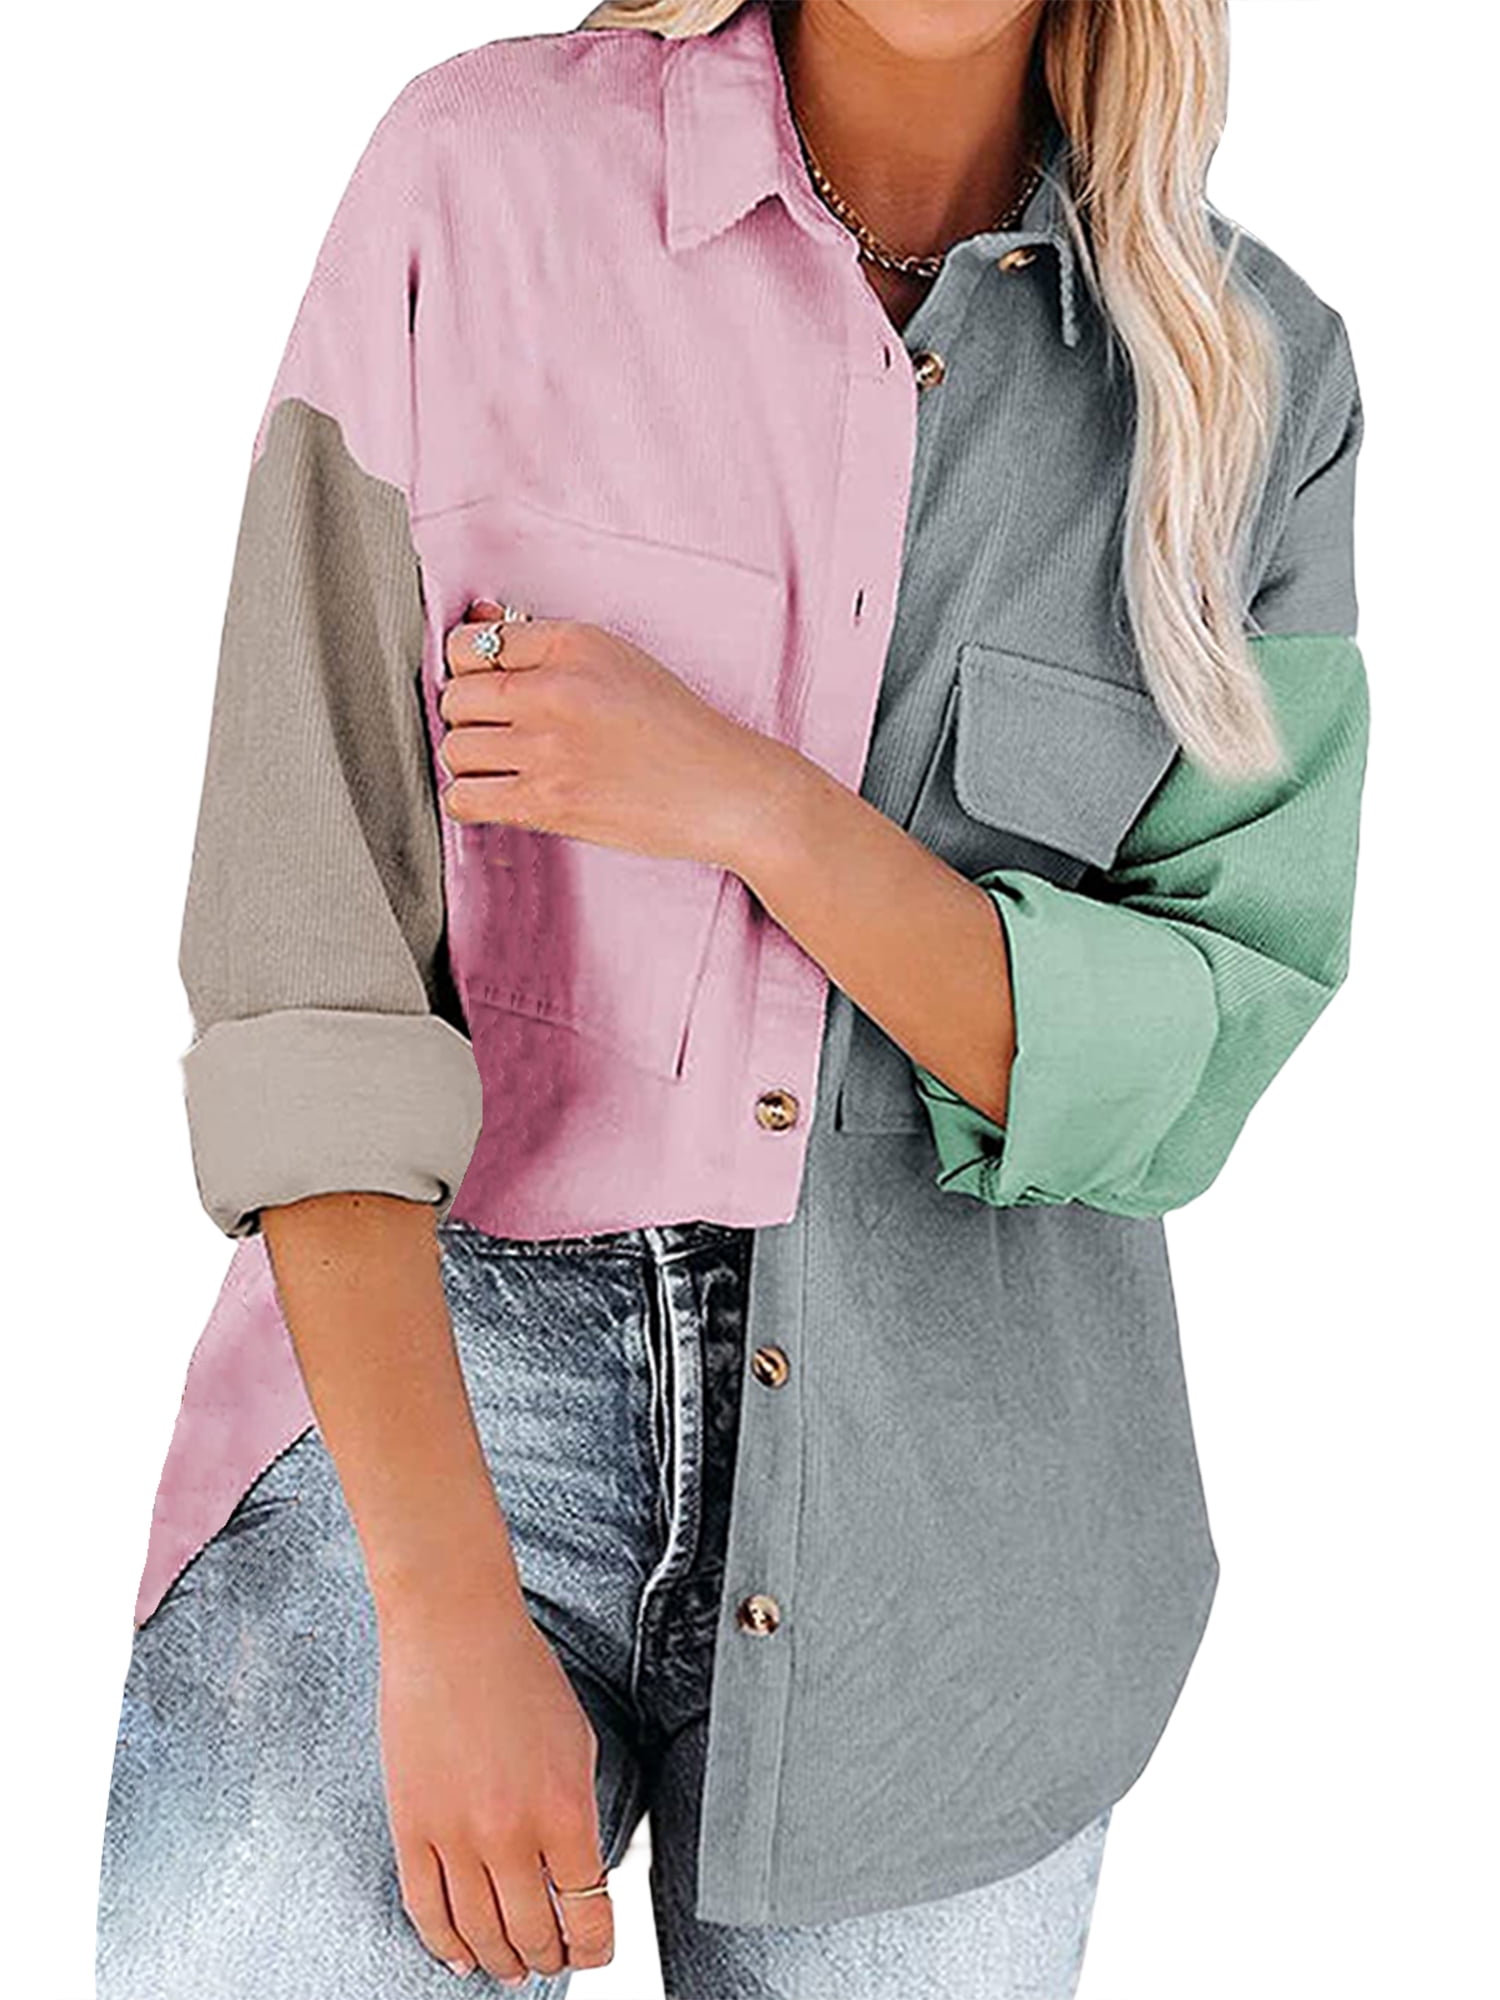 Bsubseach Long Sleeve Jacket with Pocket Plaid Color Block Buttoned Casual Shirts Outerwear